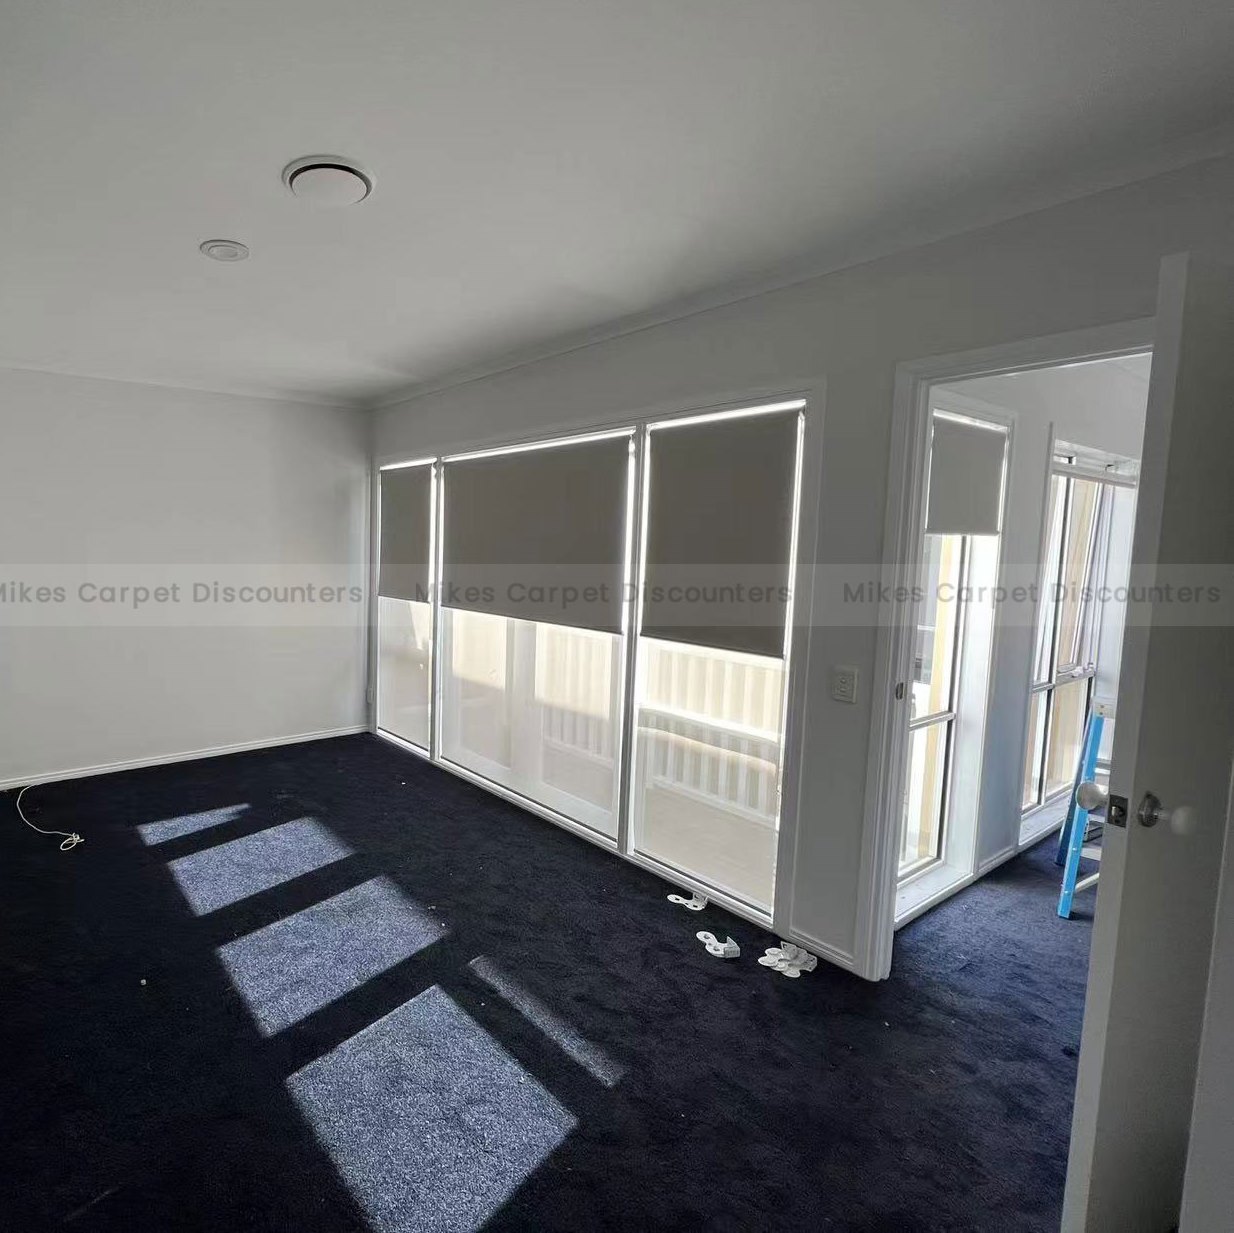 https://www.mikescarpets.com.au/wp-content/uploads/2022/06/Mikes-Window-Covering-Work-1.jpg